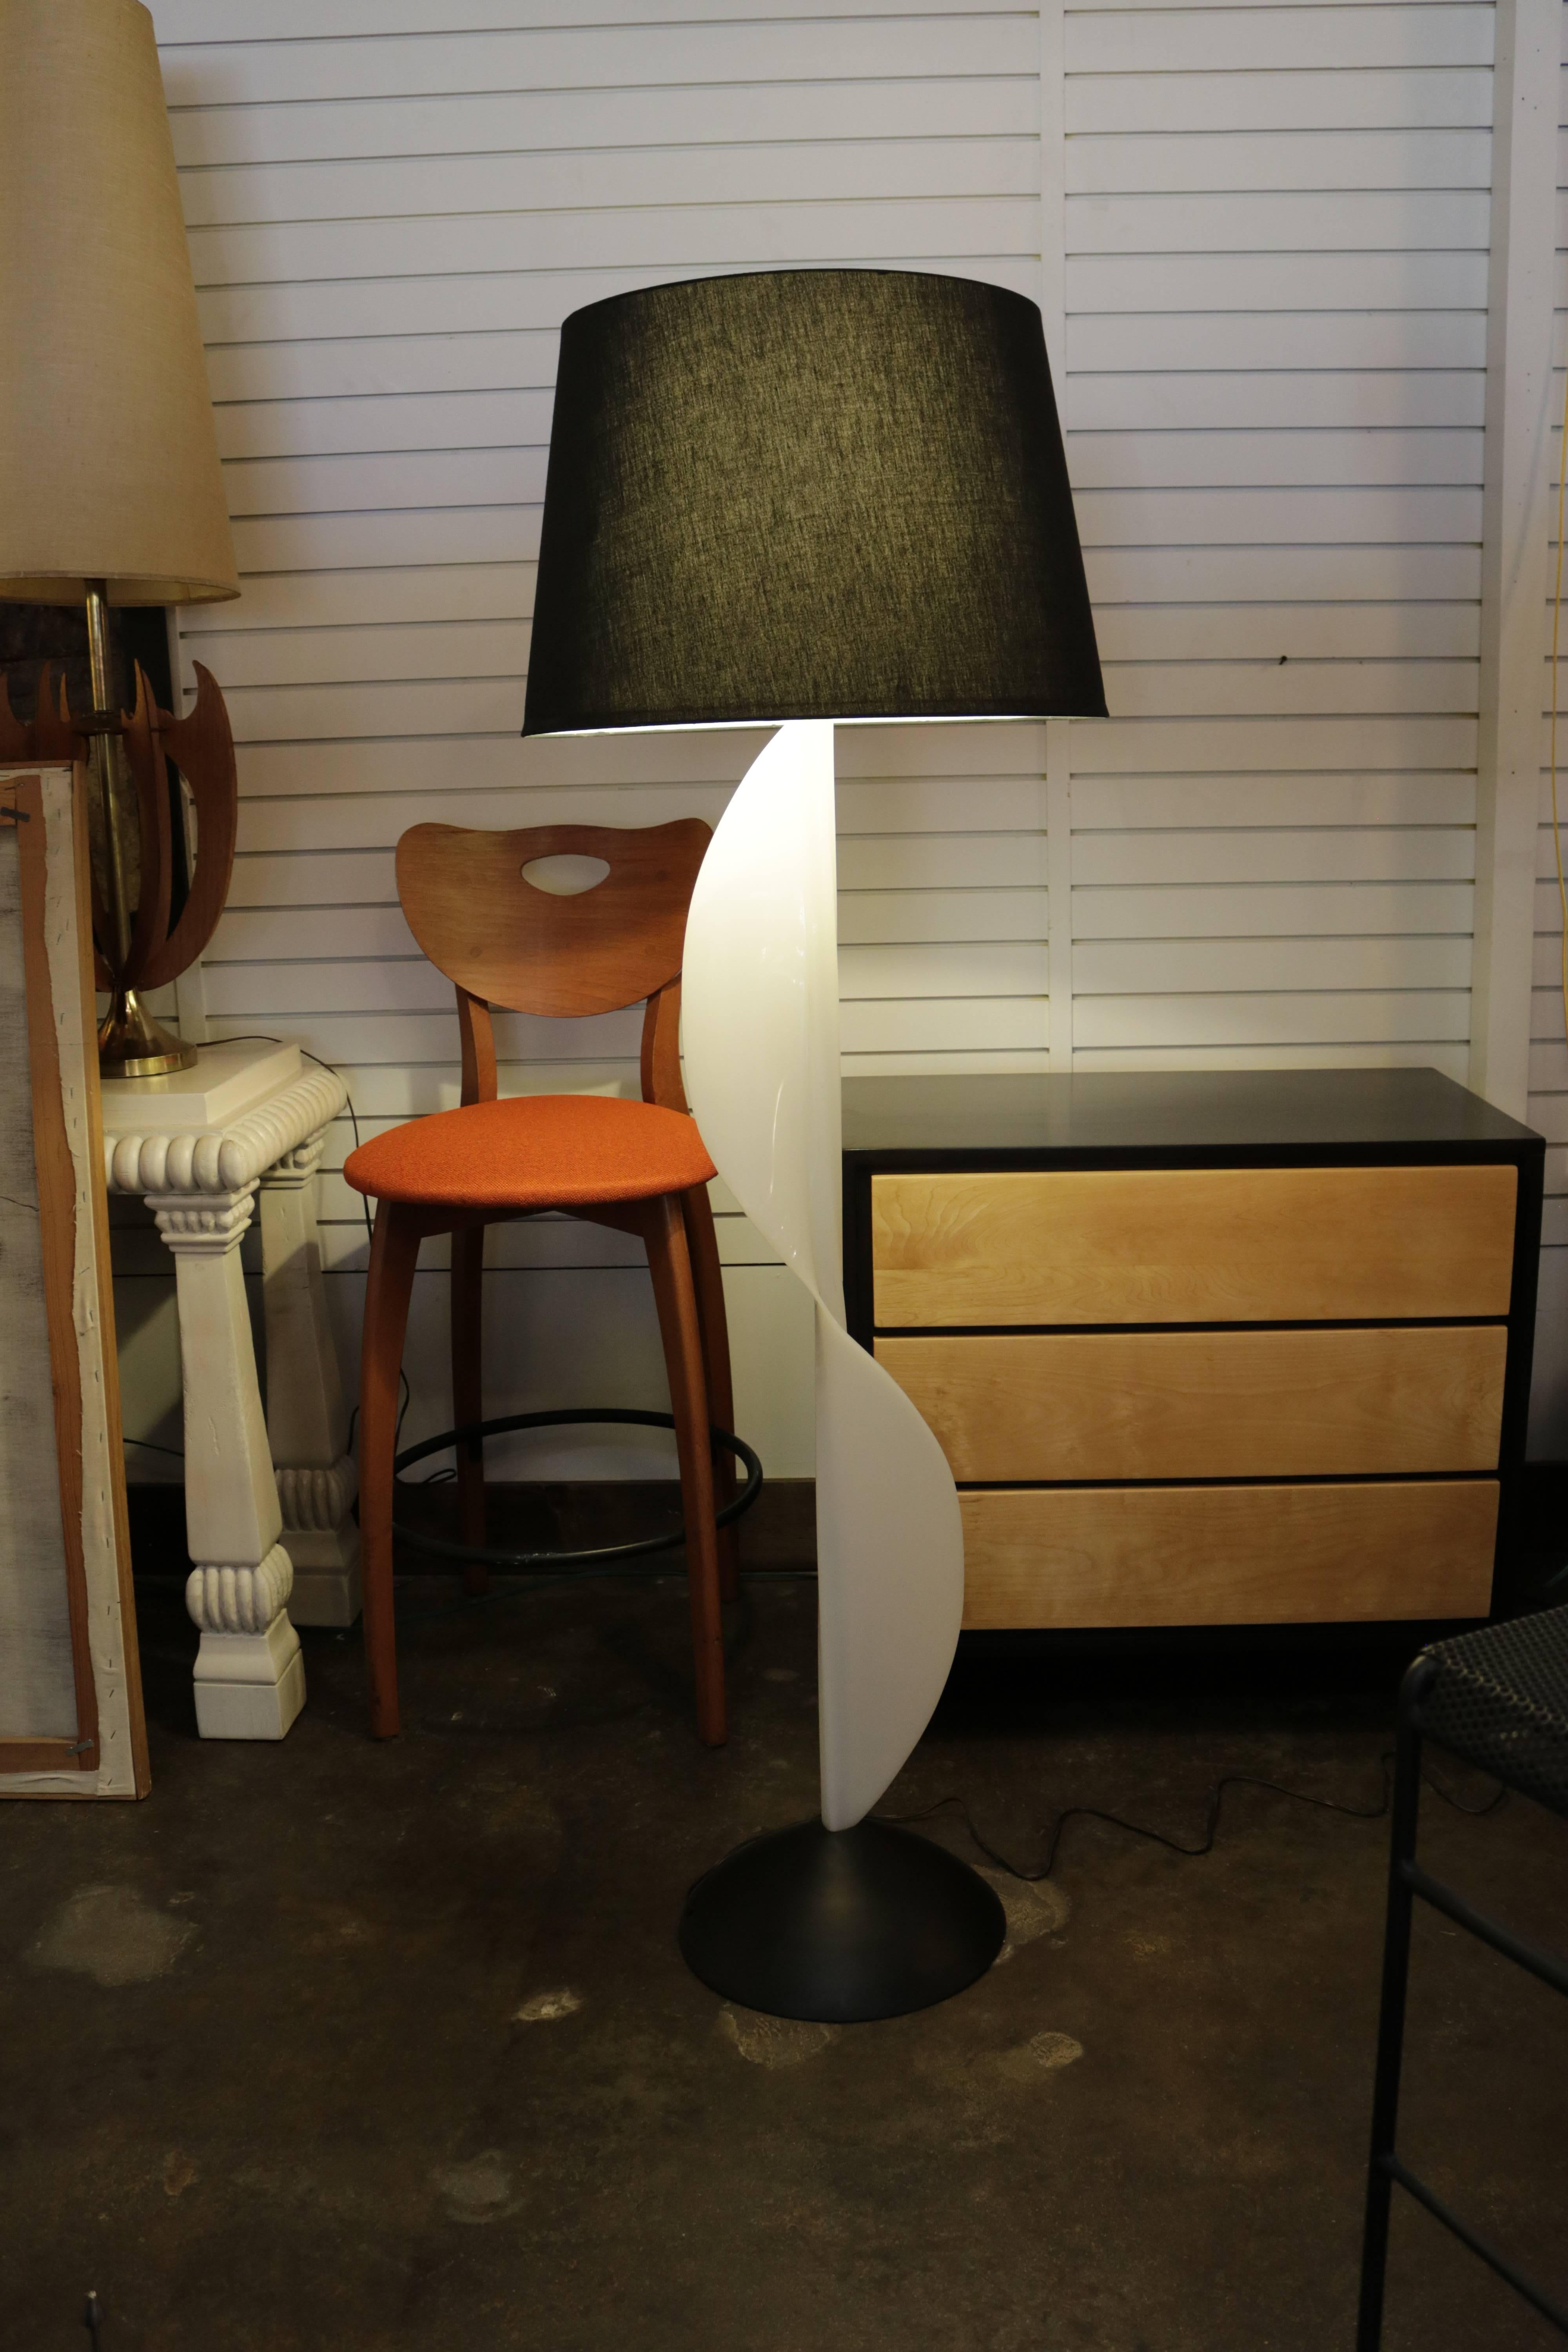 Molded resin floor lamp made in Canada by Rougier. Lamp has an unique undulating, wave-like design. Measures 13" in diameter across the base, 62" H to top of finial or 50" H to bottom of harp.